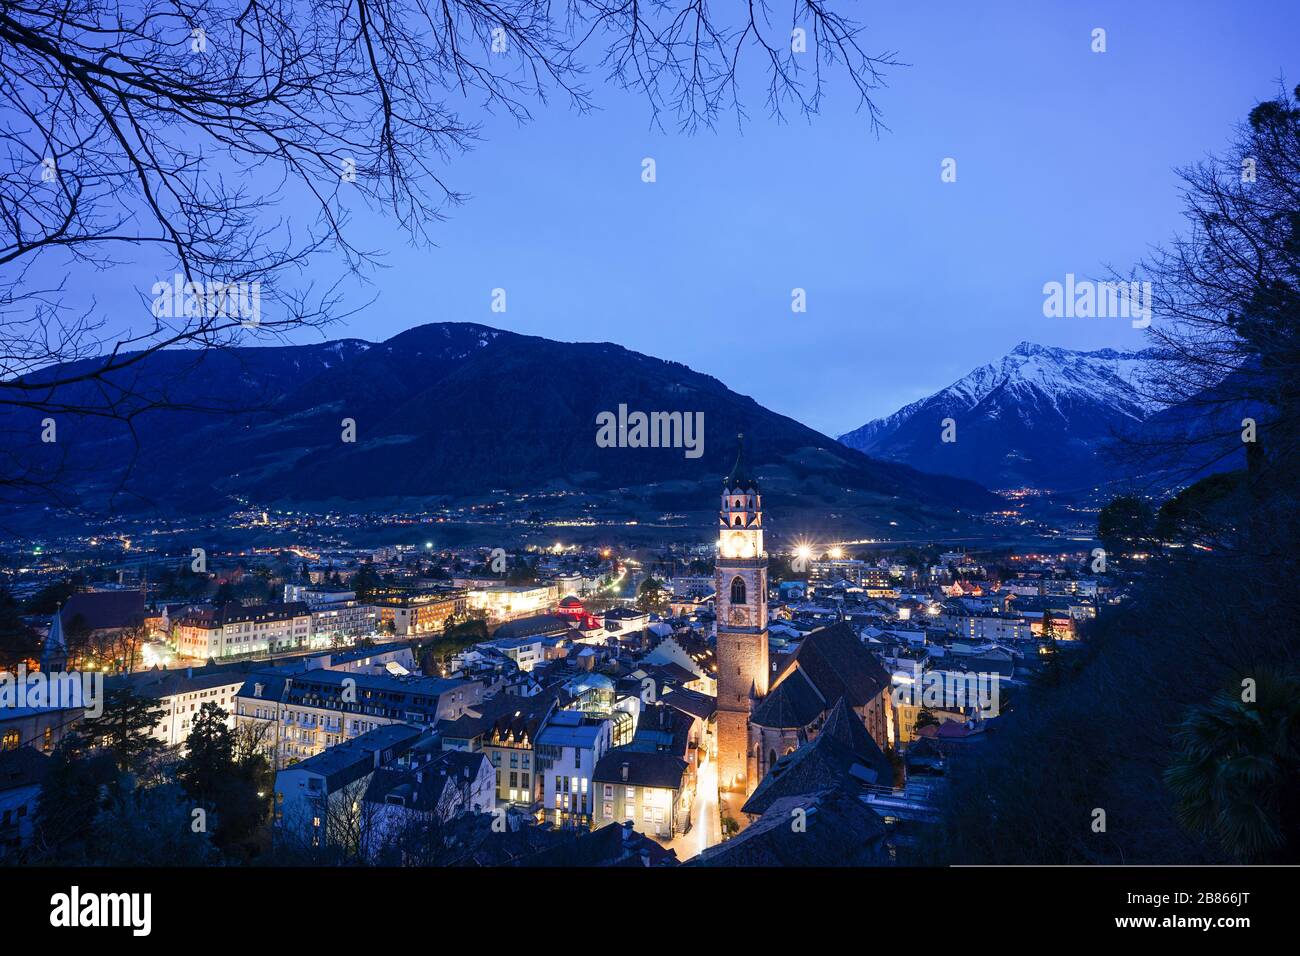 The skyline of the city Merano/Meran in South Tyrol, Italy during the night Stock Photo